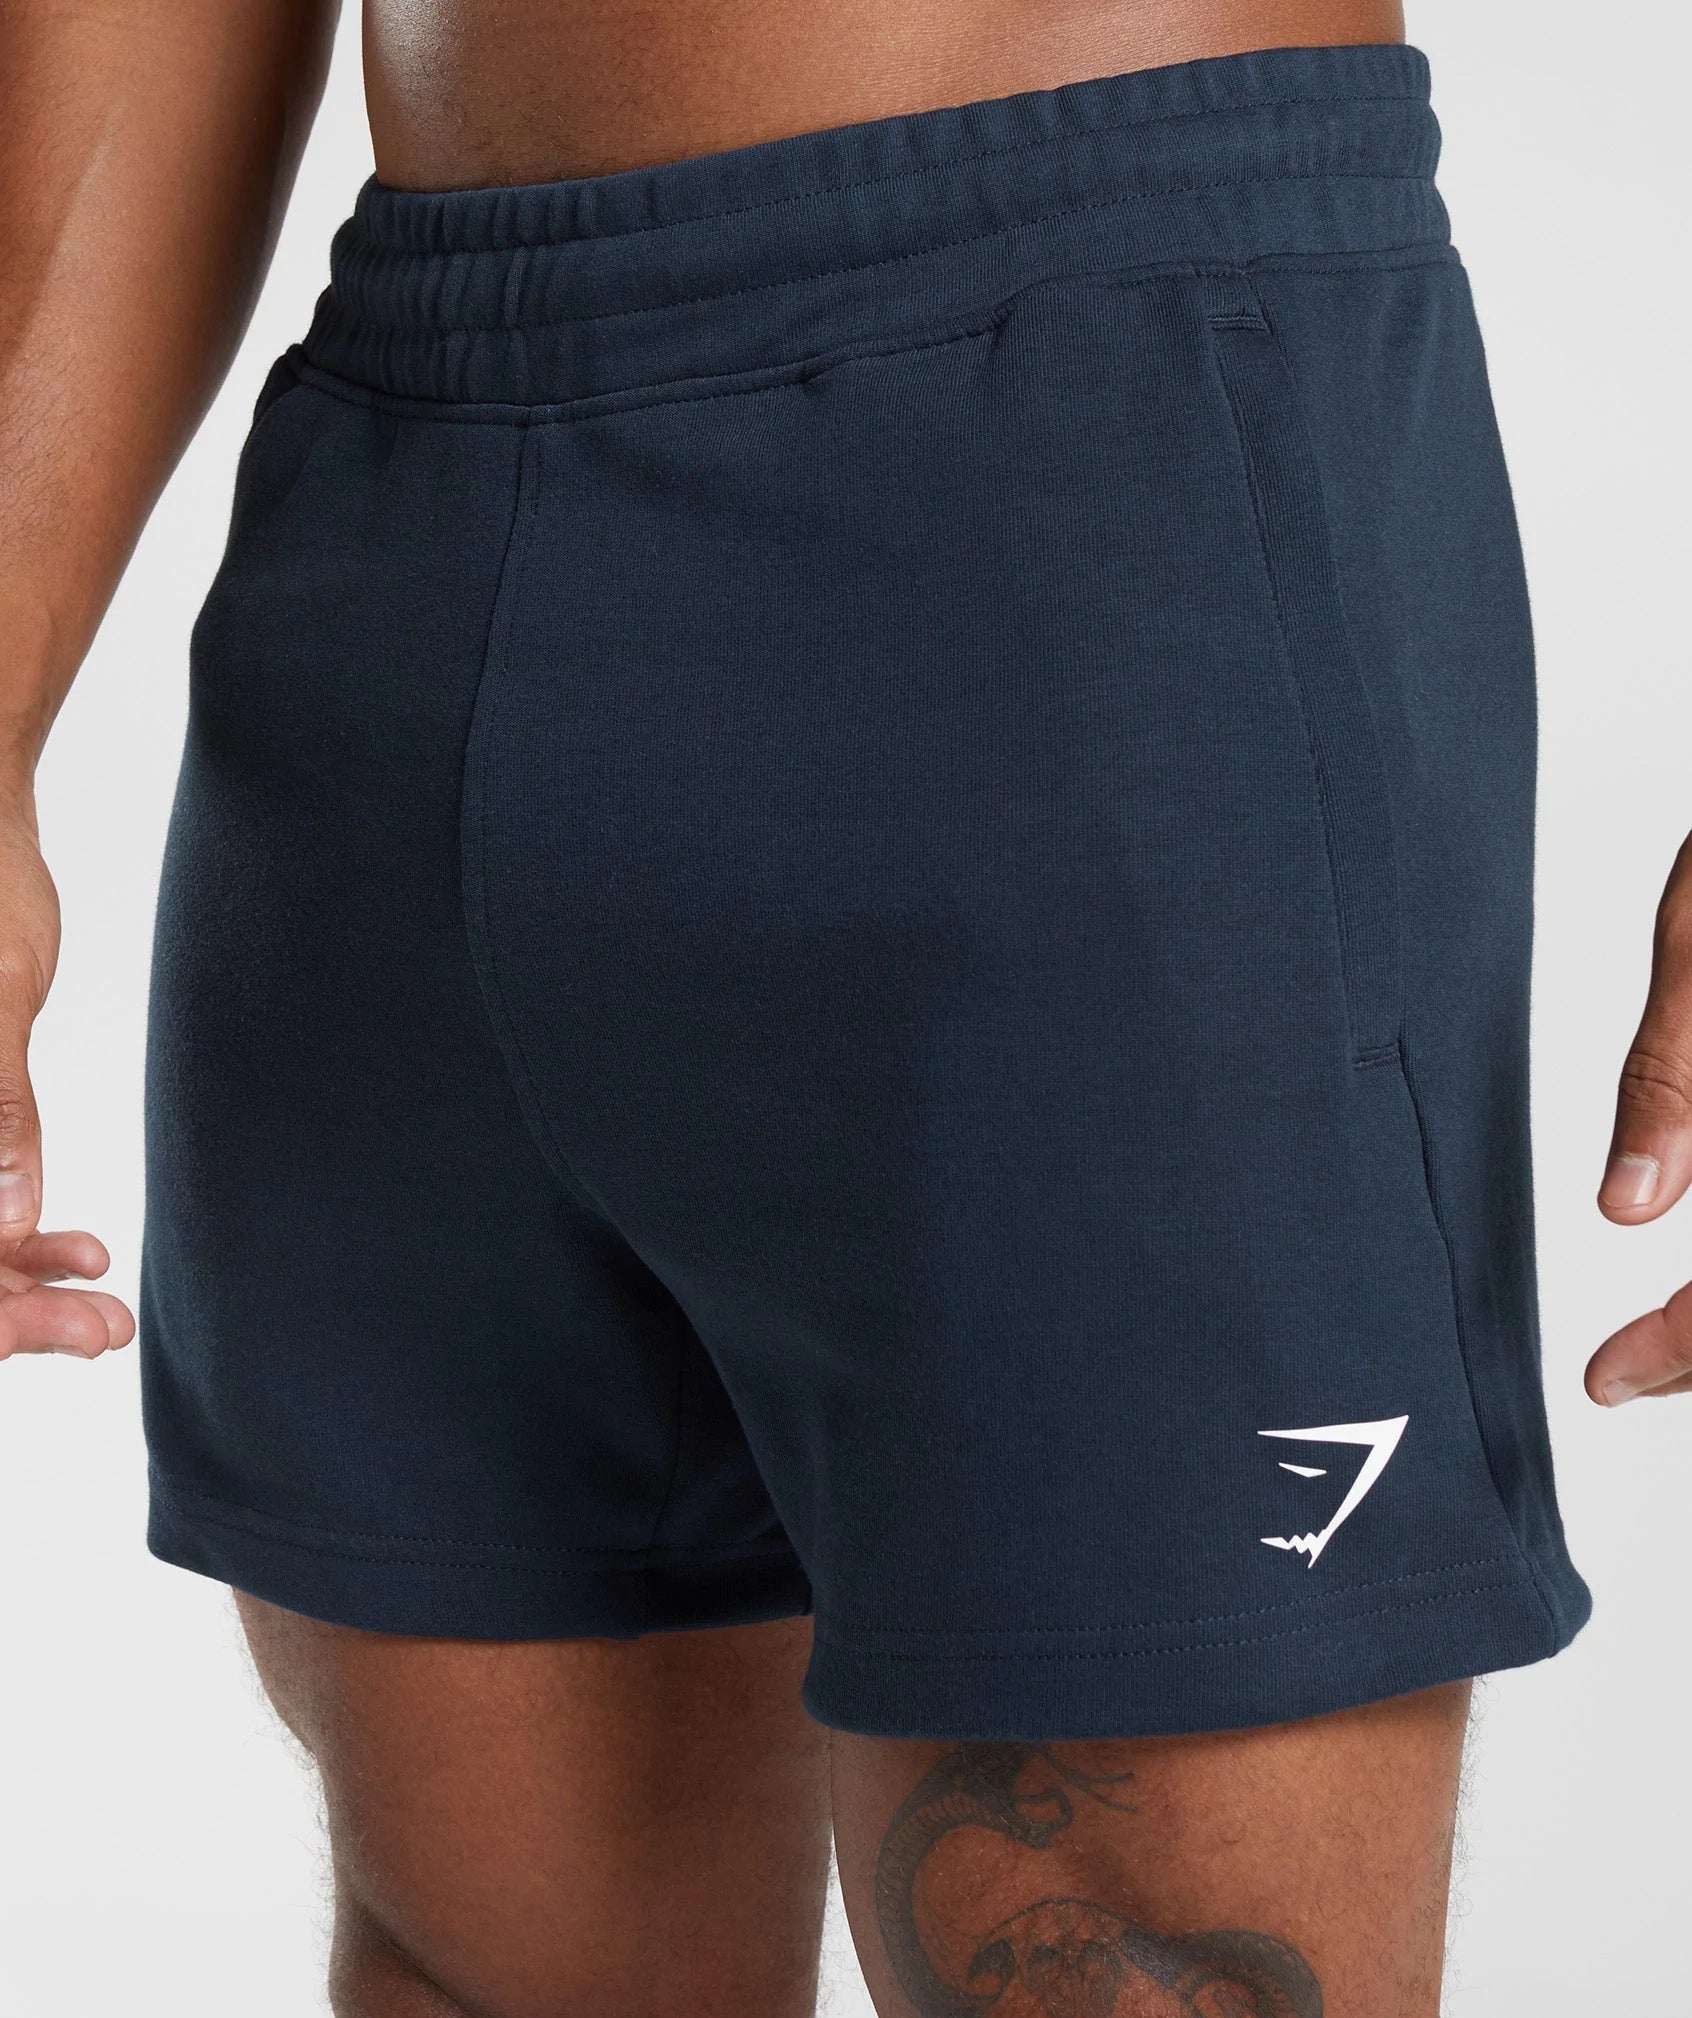 React 5" Shorts in Navy - view 6